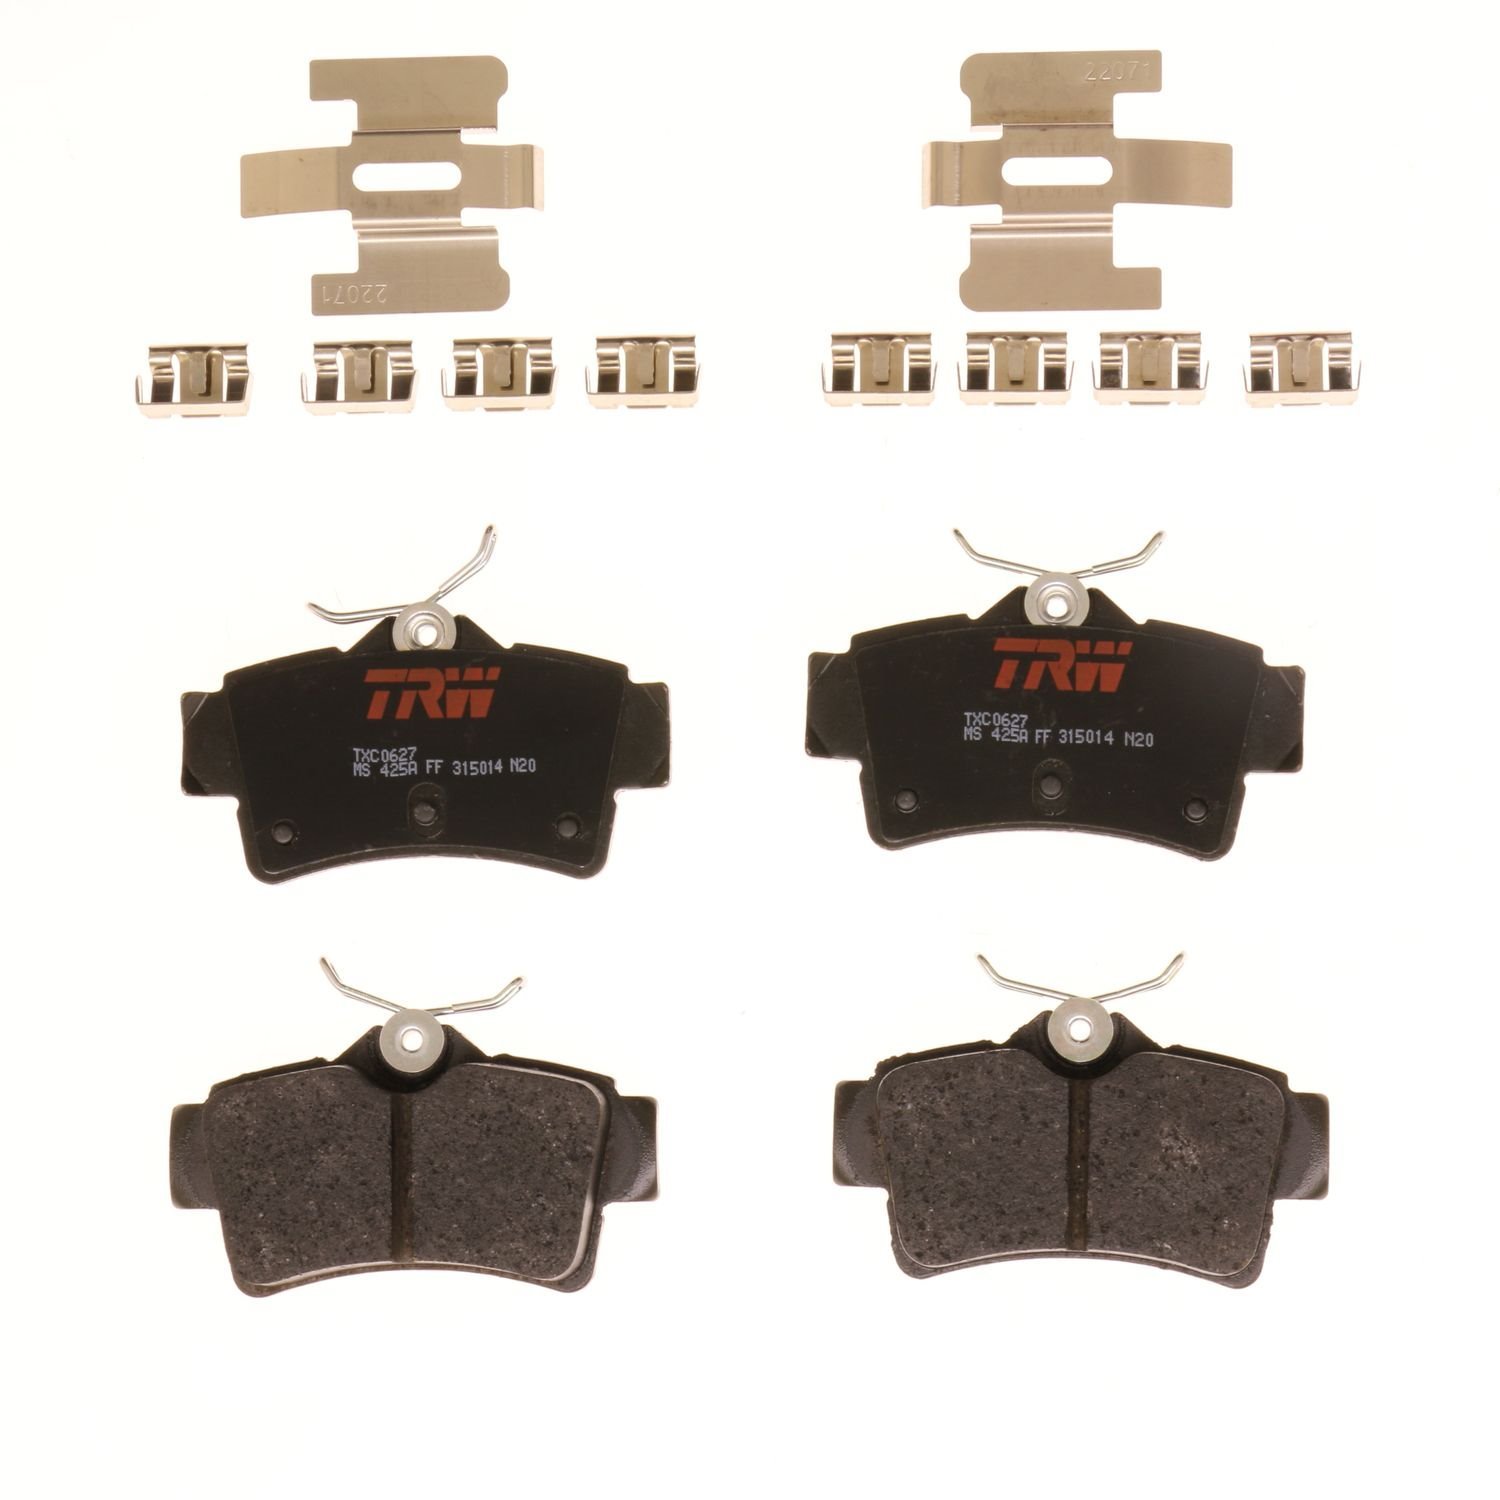 TXC0627 Ultra-Series Disc Brake Pad Set for Ford Mustang 2004-1994, Position: Rear